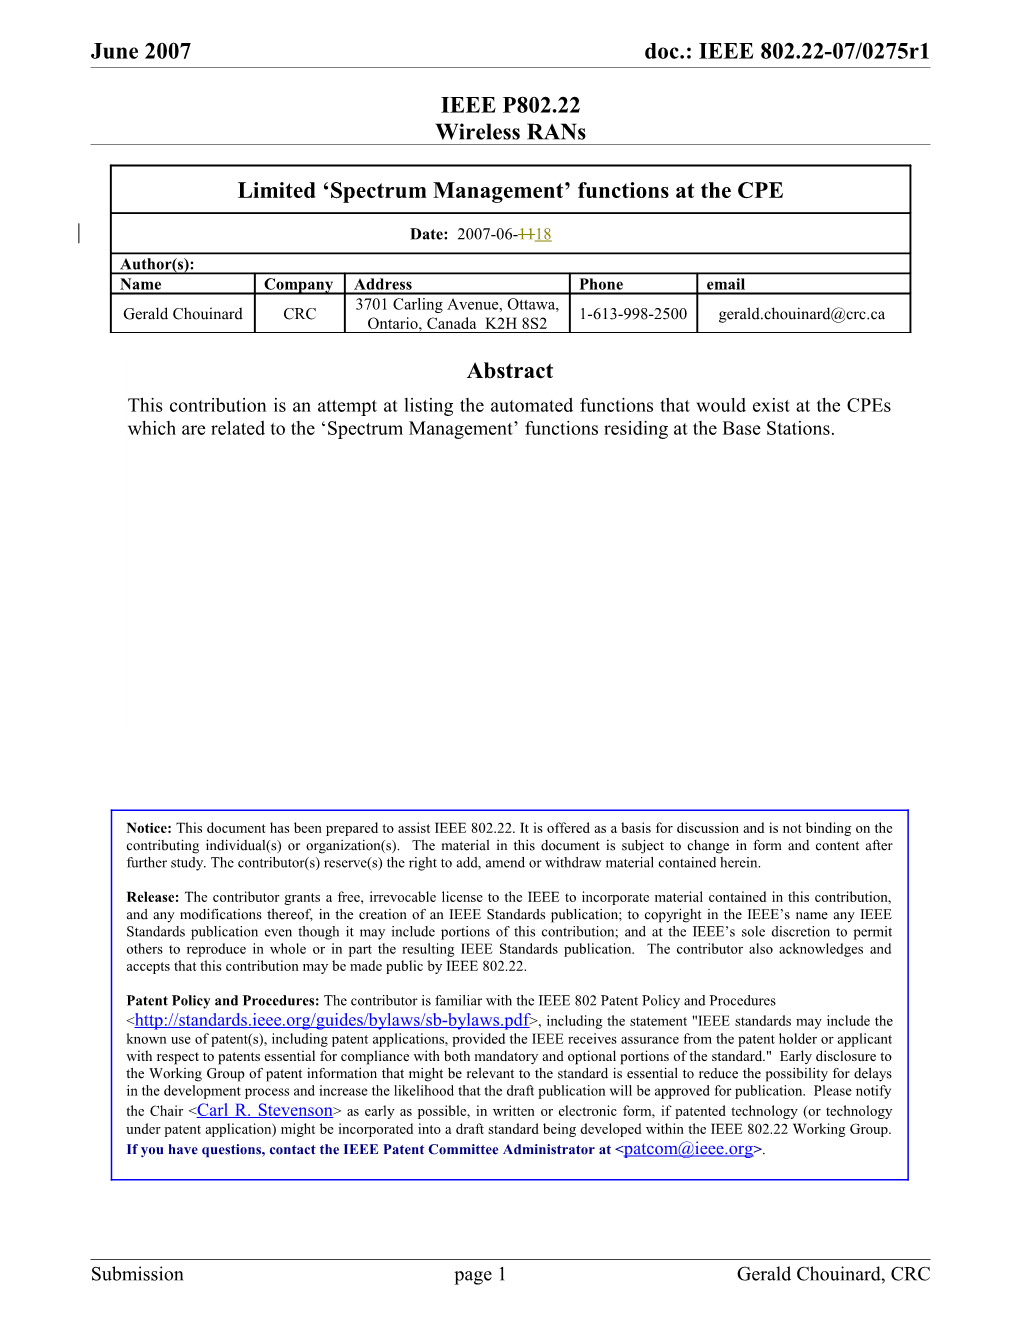 Limited Spectrum Management Functions at the CPE